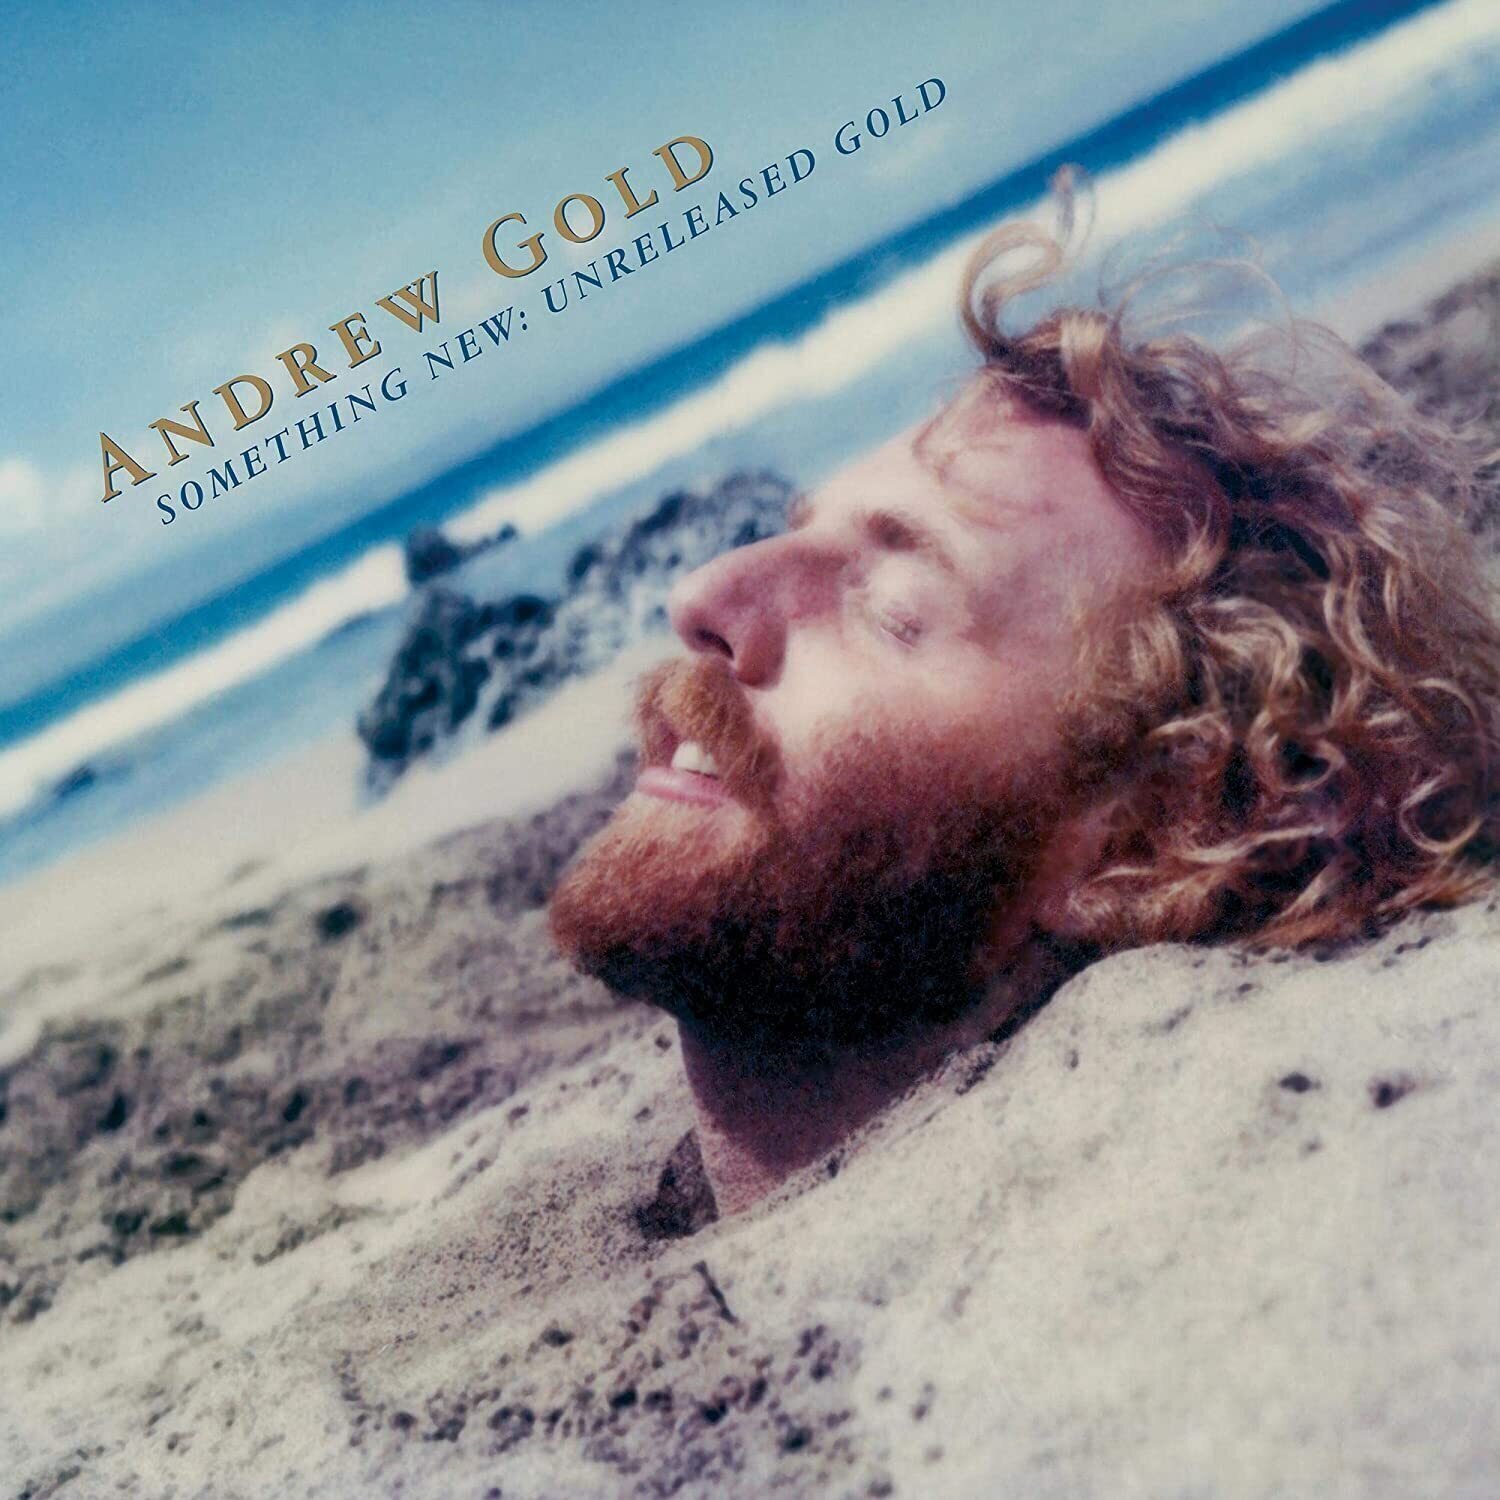 LP Andrew Gold - Something New: Unreleased Gold (RSD) (LP)